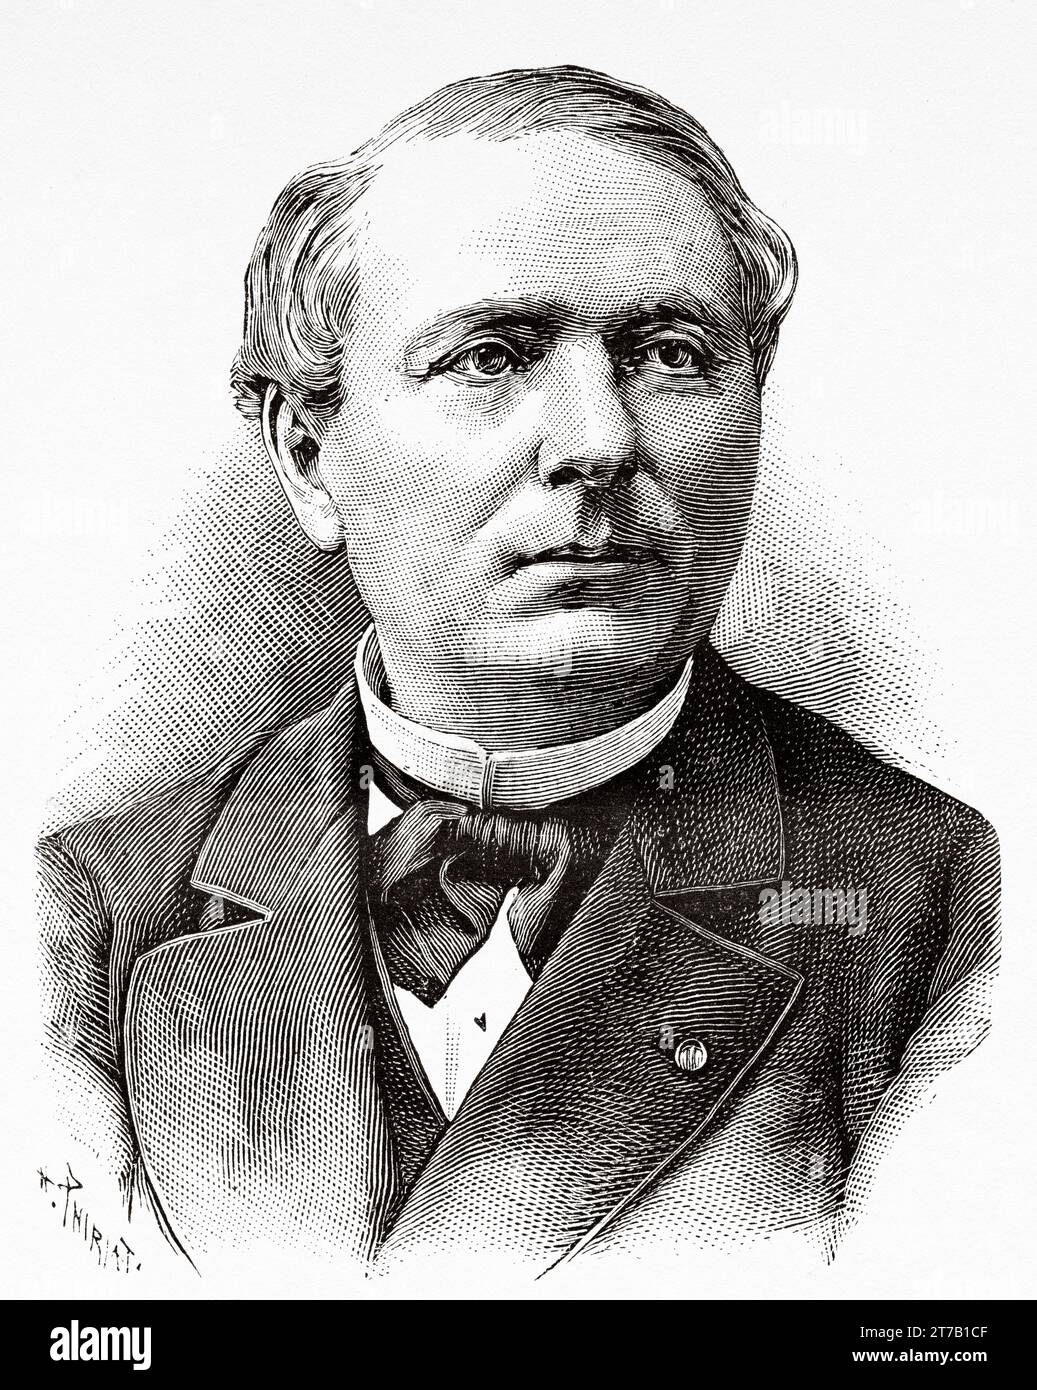 Portrait of Jules Auguste Beclard (1817 - 1887) was a French physiologist born in Paris, France. Old illustration from La Nature 1887 Stock Photo